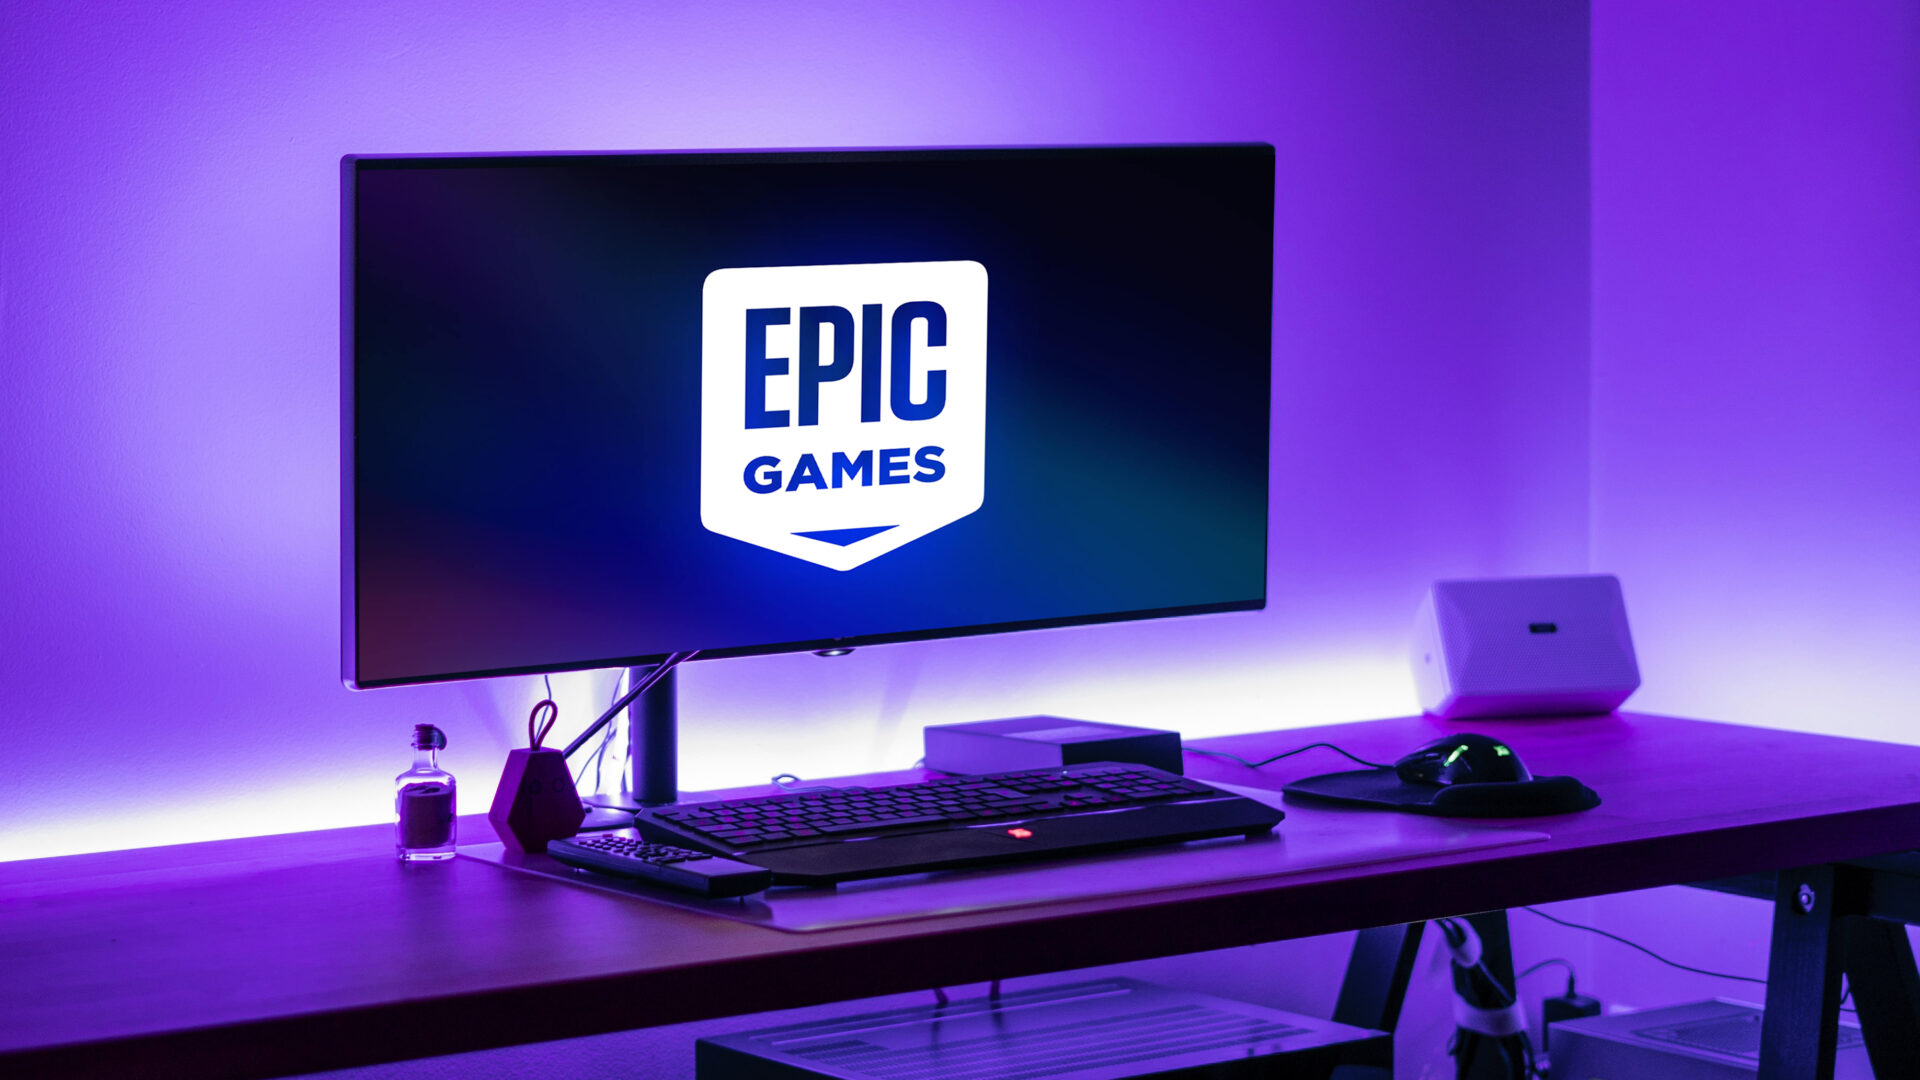 I can't install the Epic Games Launcher - Epic Games Store Support